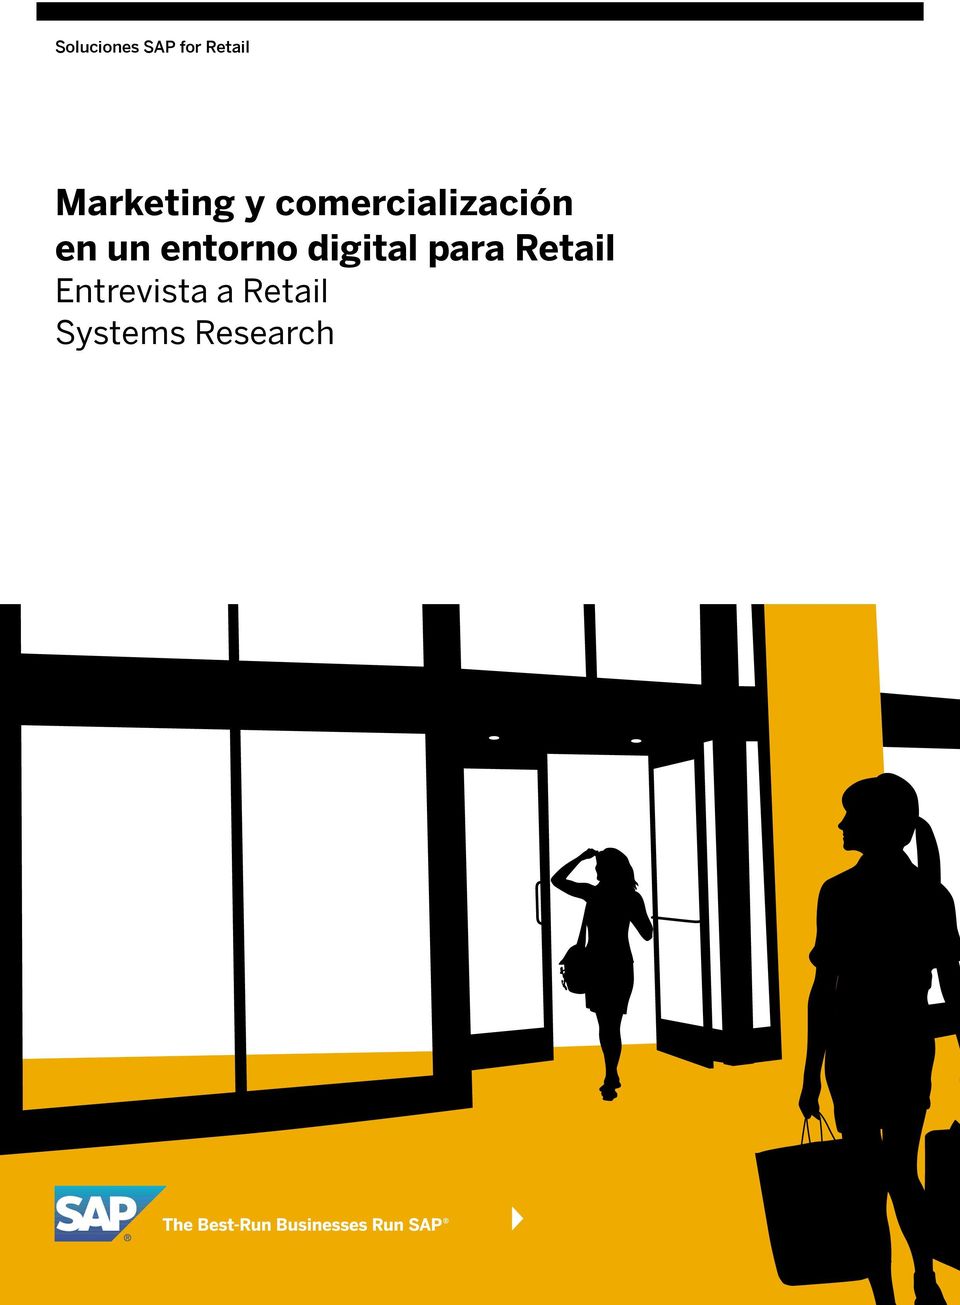 Retail Entrevista a Retail Systems Research